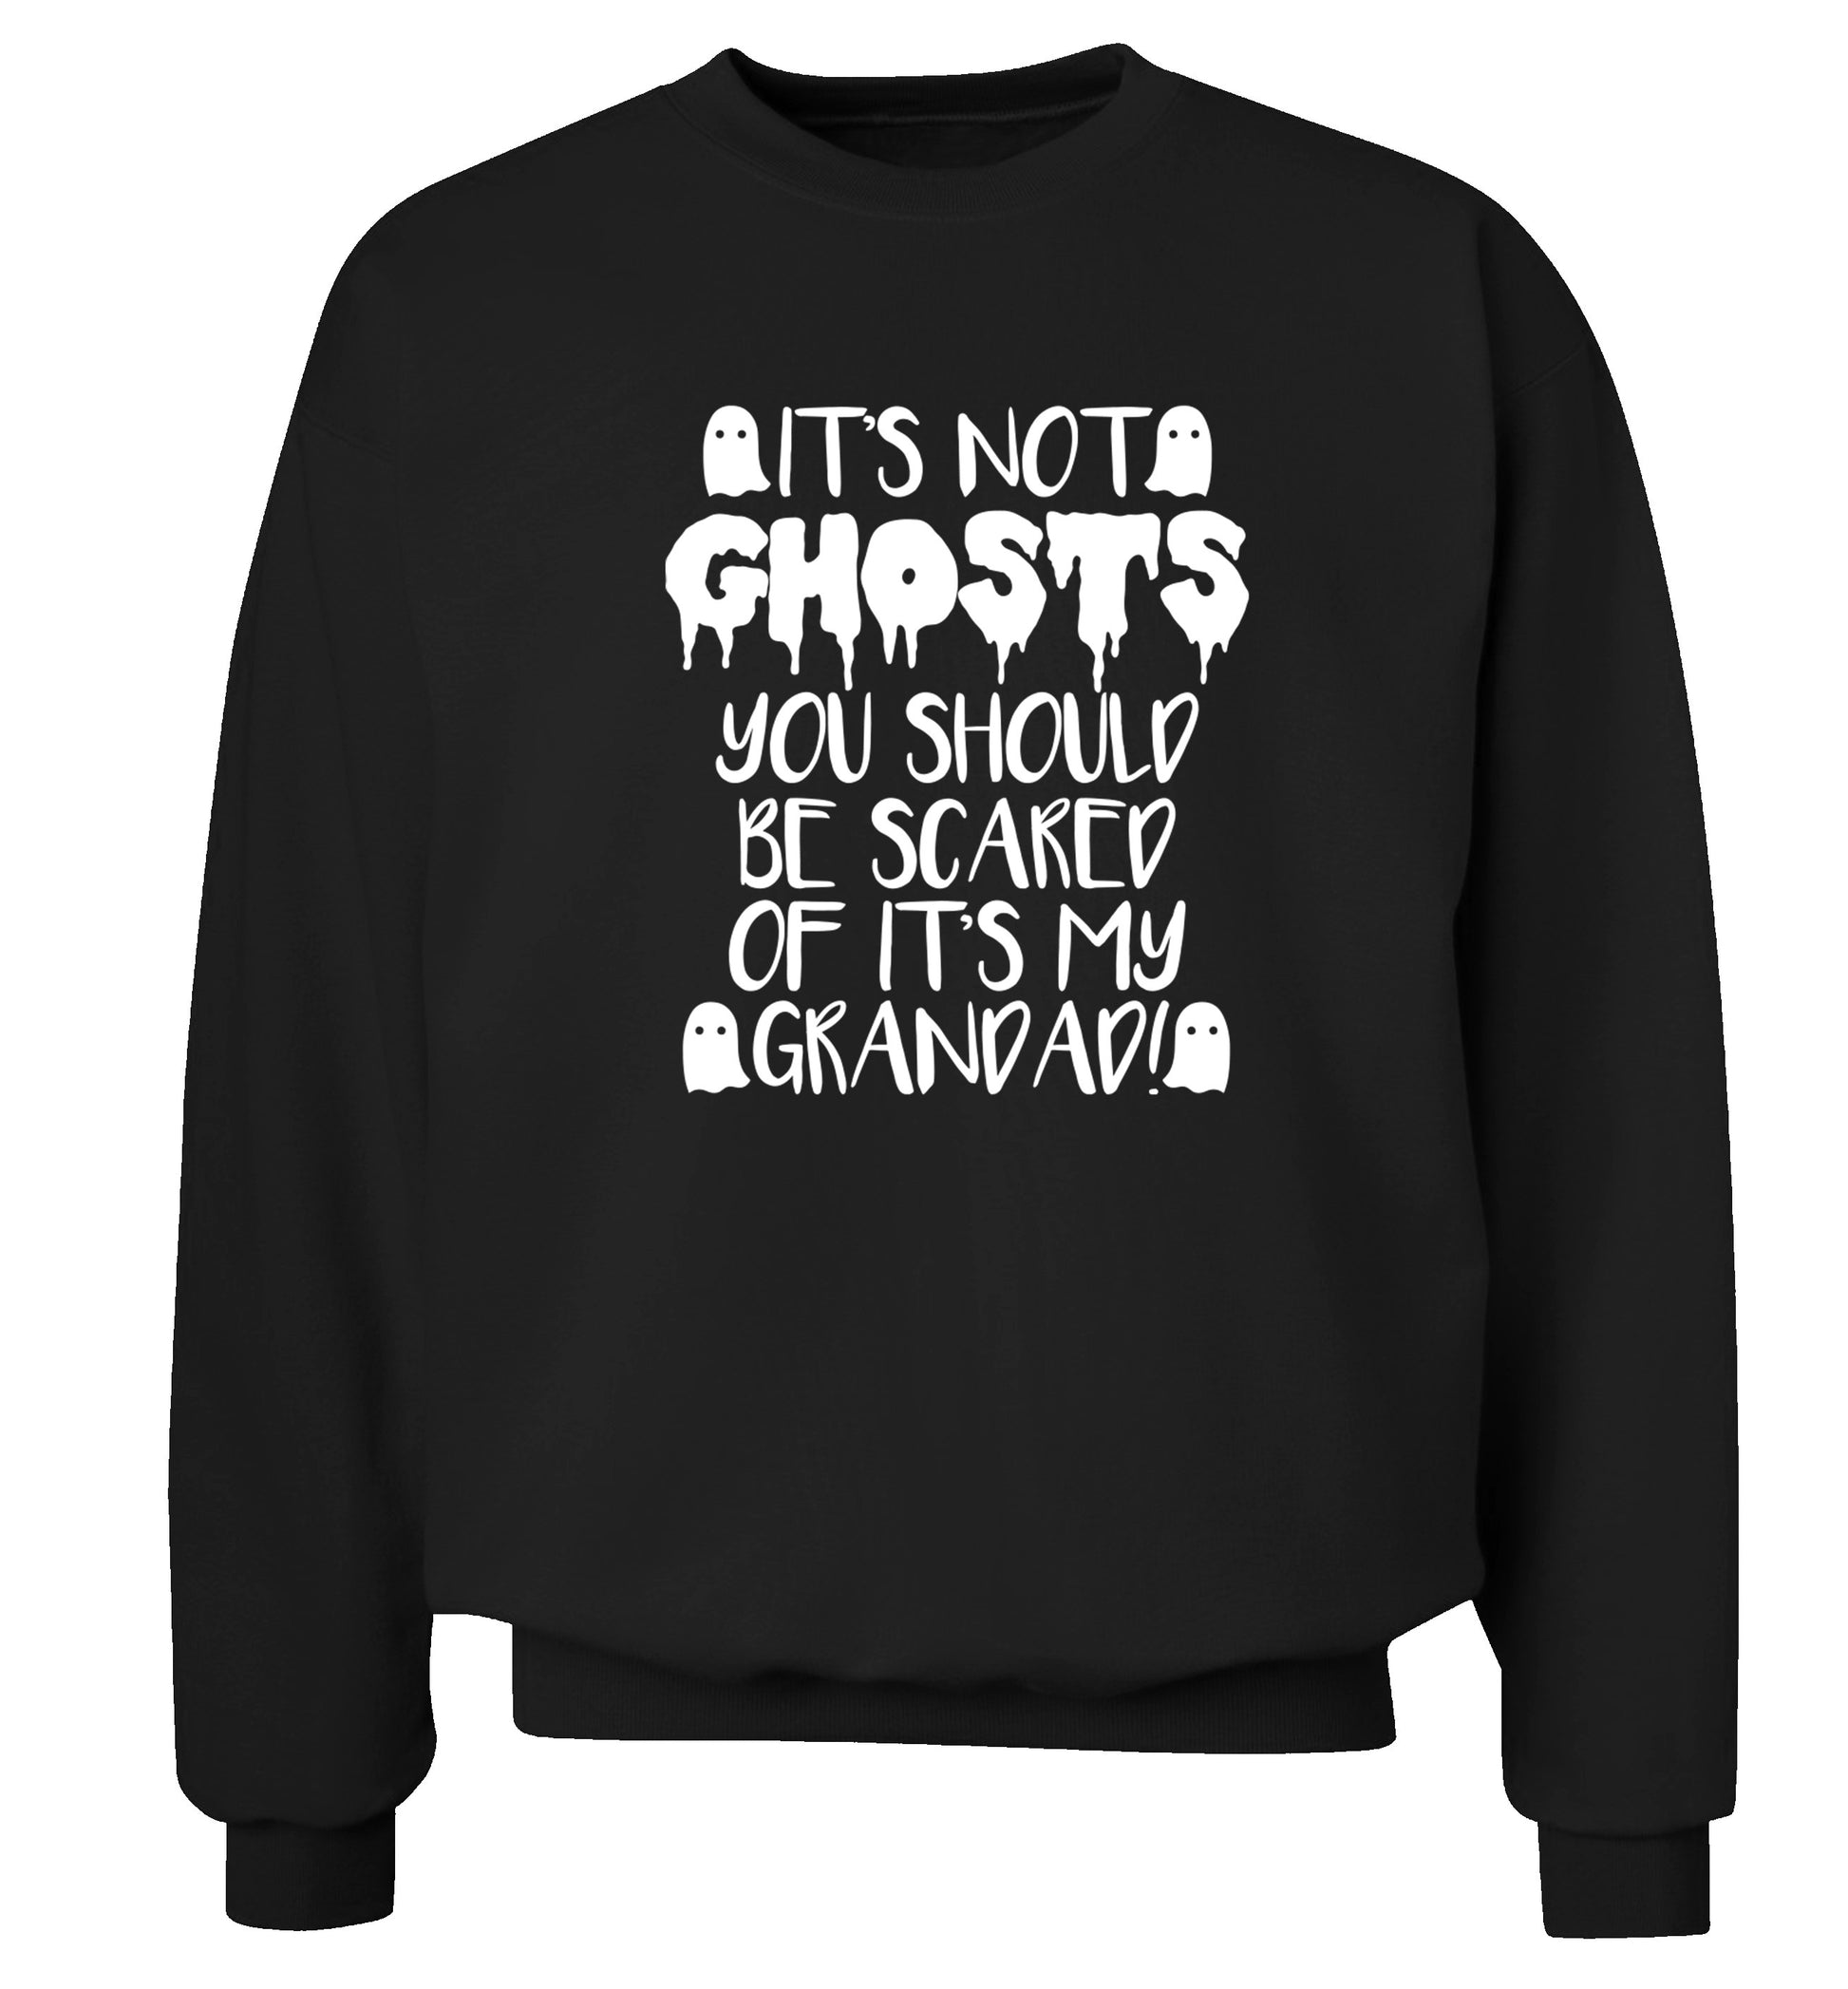 It's not ghosts you should be scared of it's my grandad! Adult's unisex black Sweater 2XL